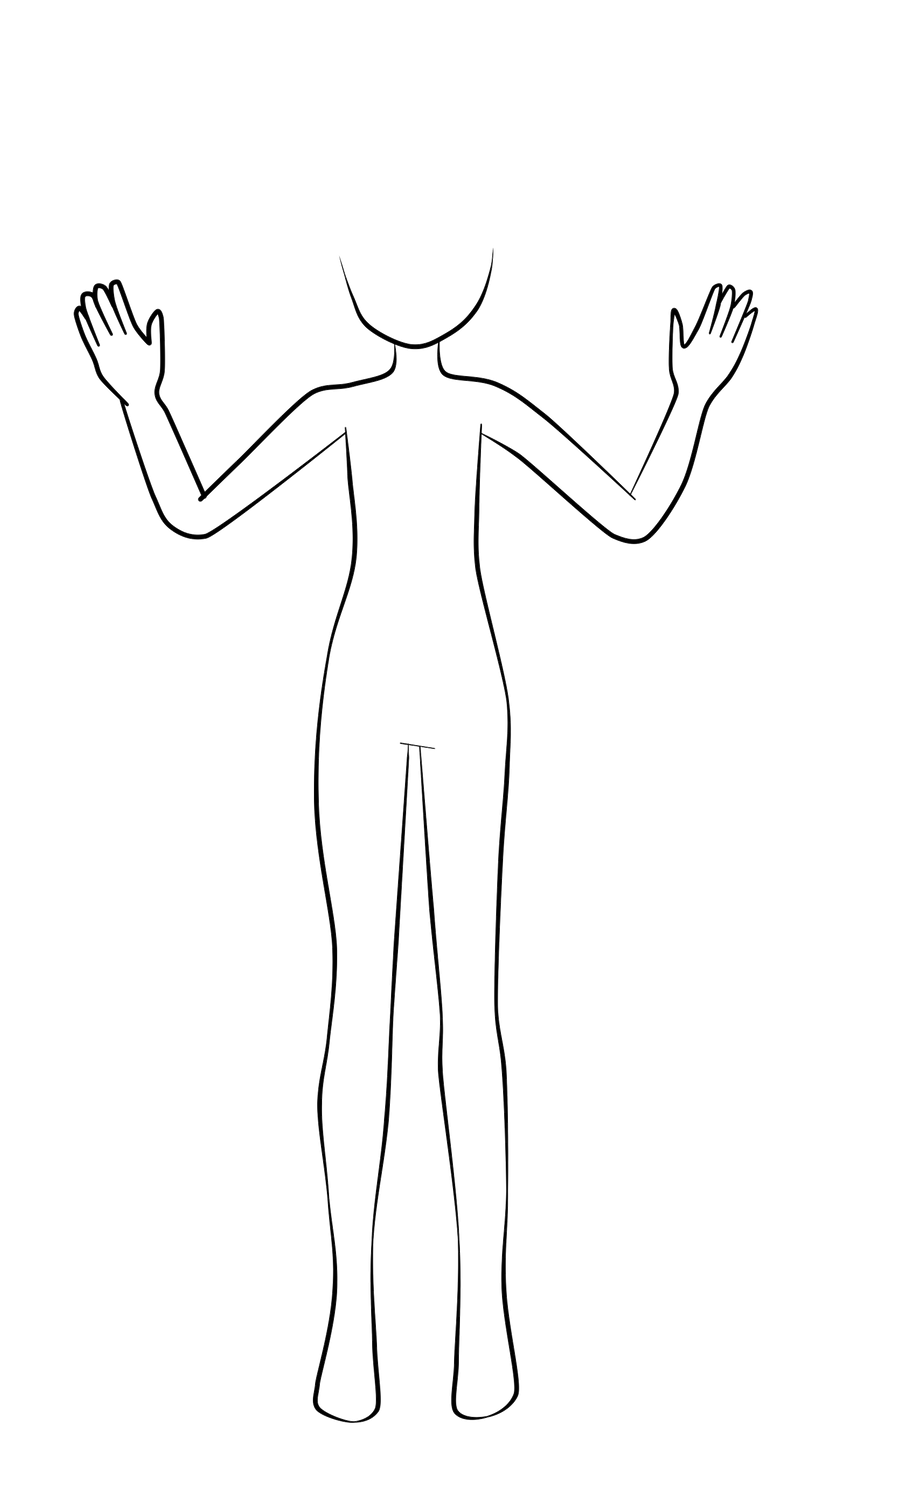 Body Outline Drawing Image